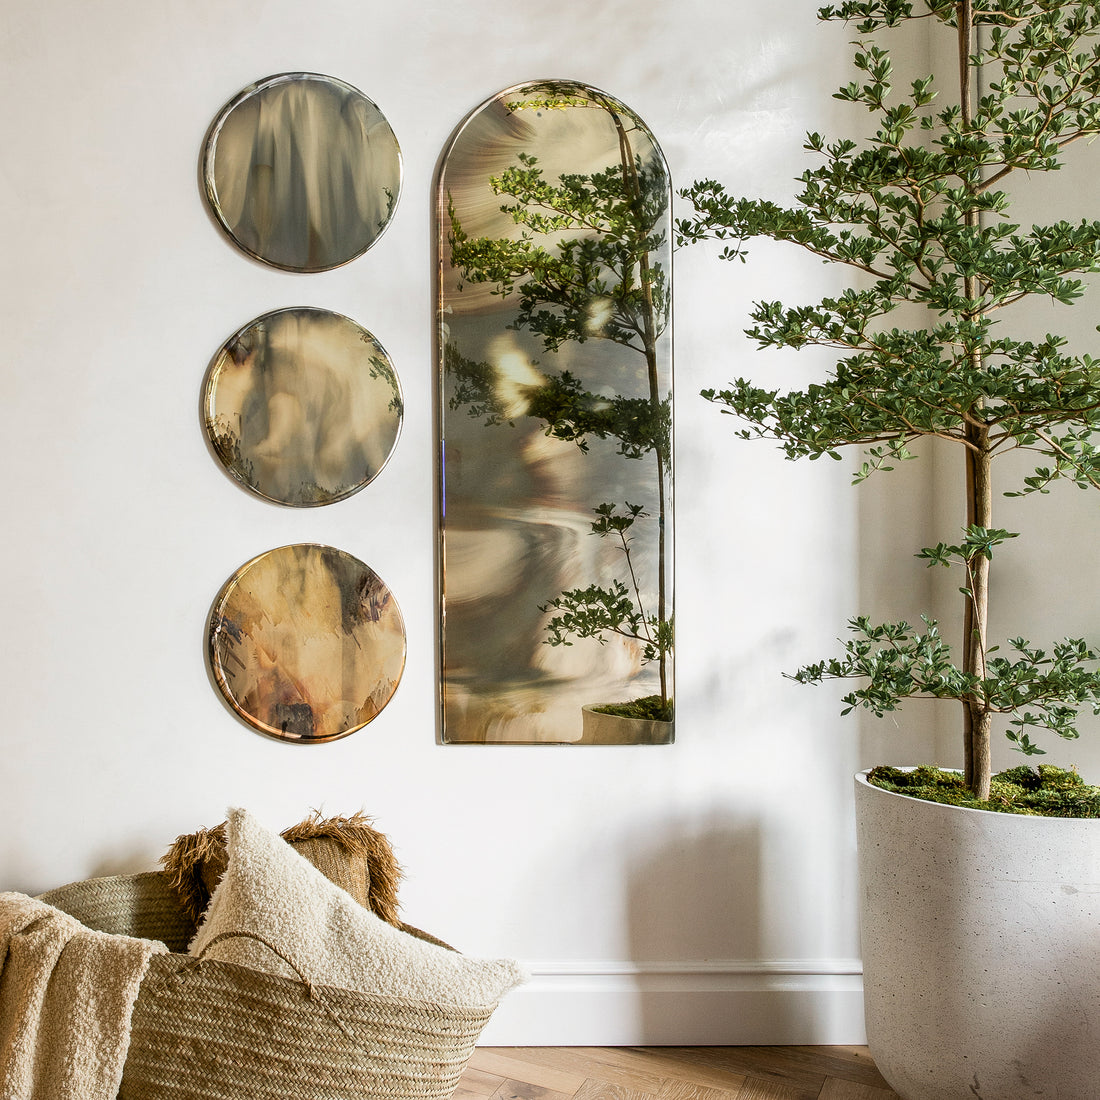 Antiqued mirrors hanging on a plastered wall.